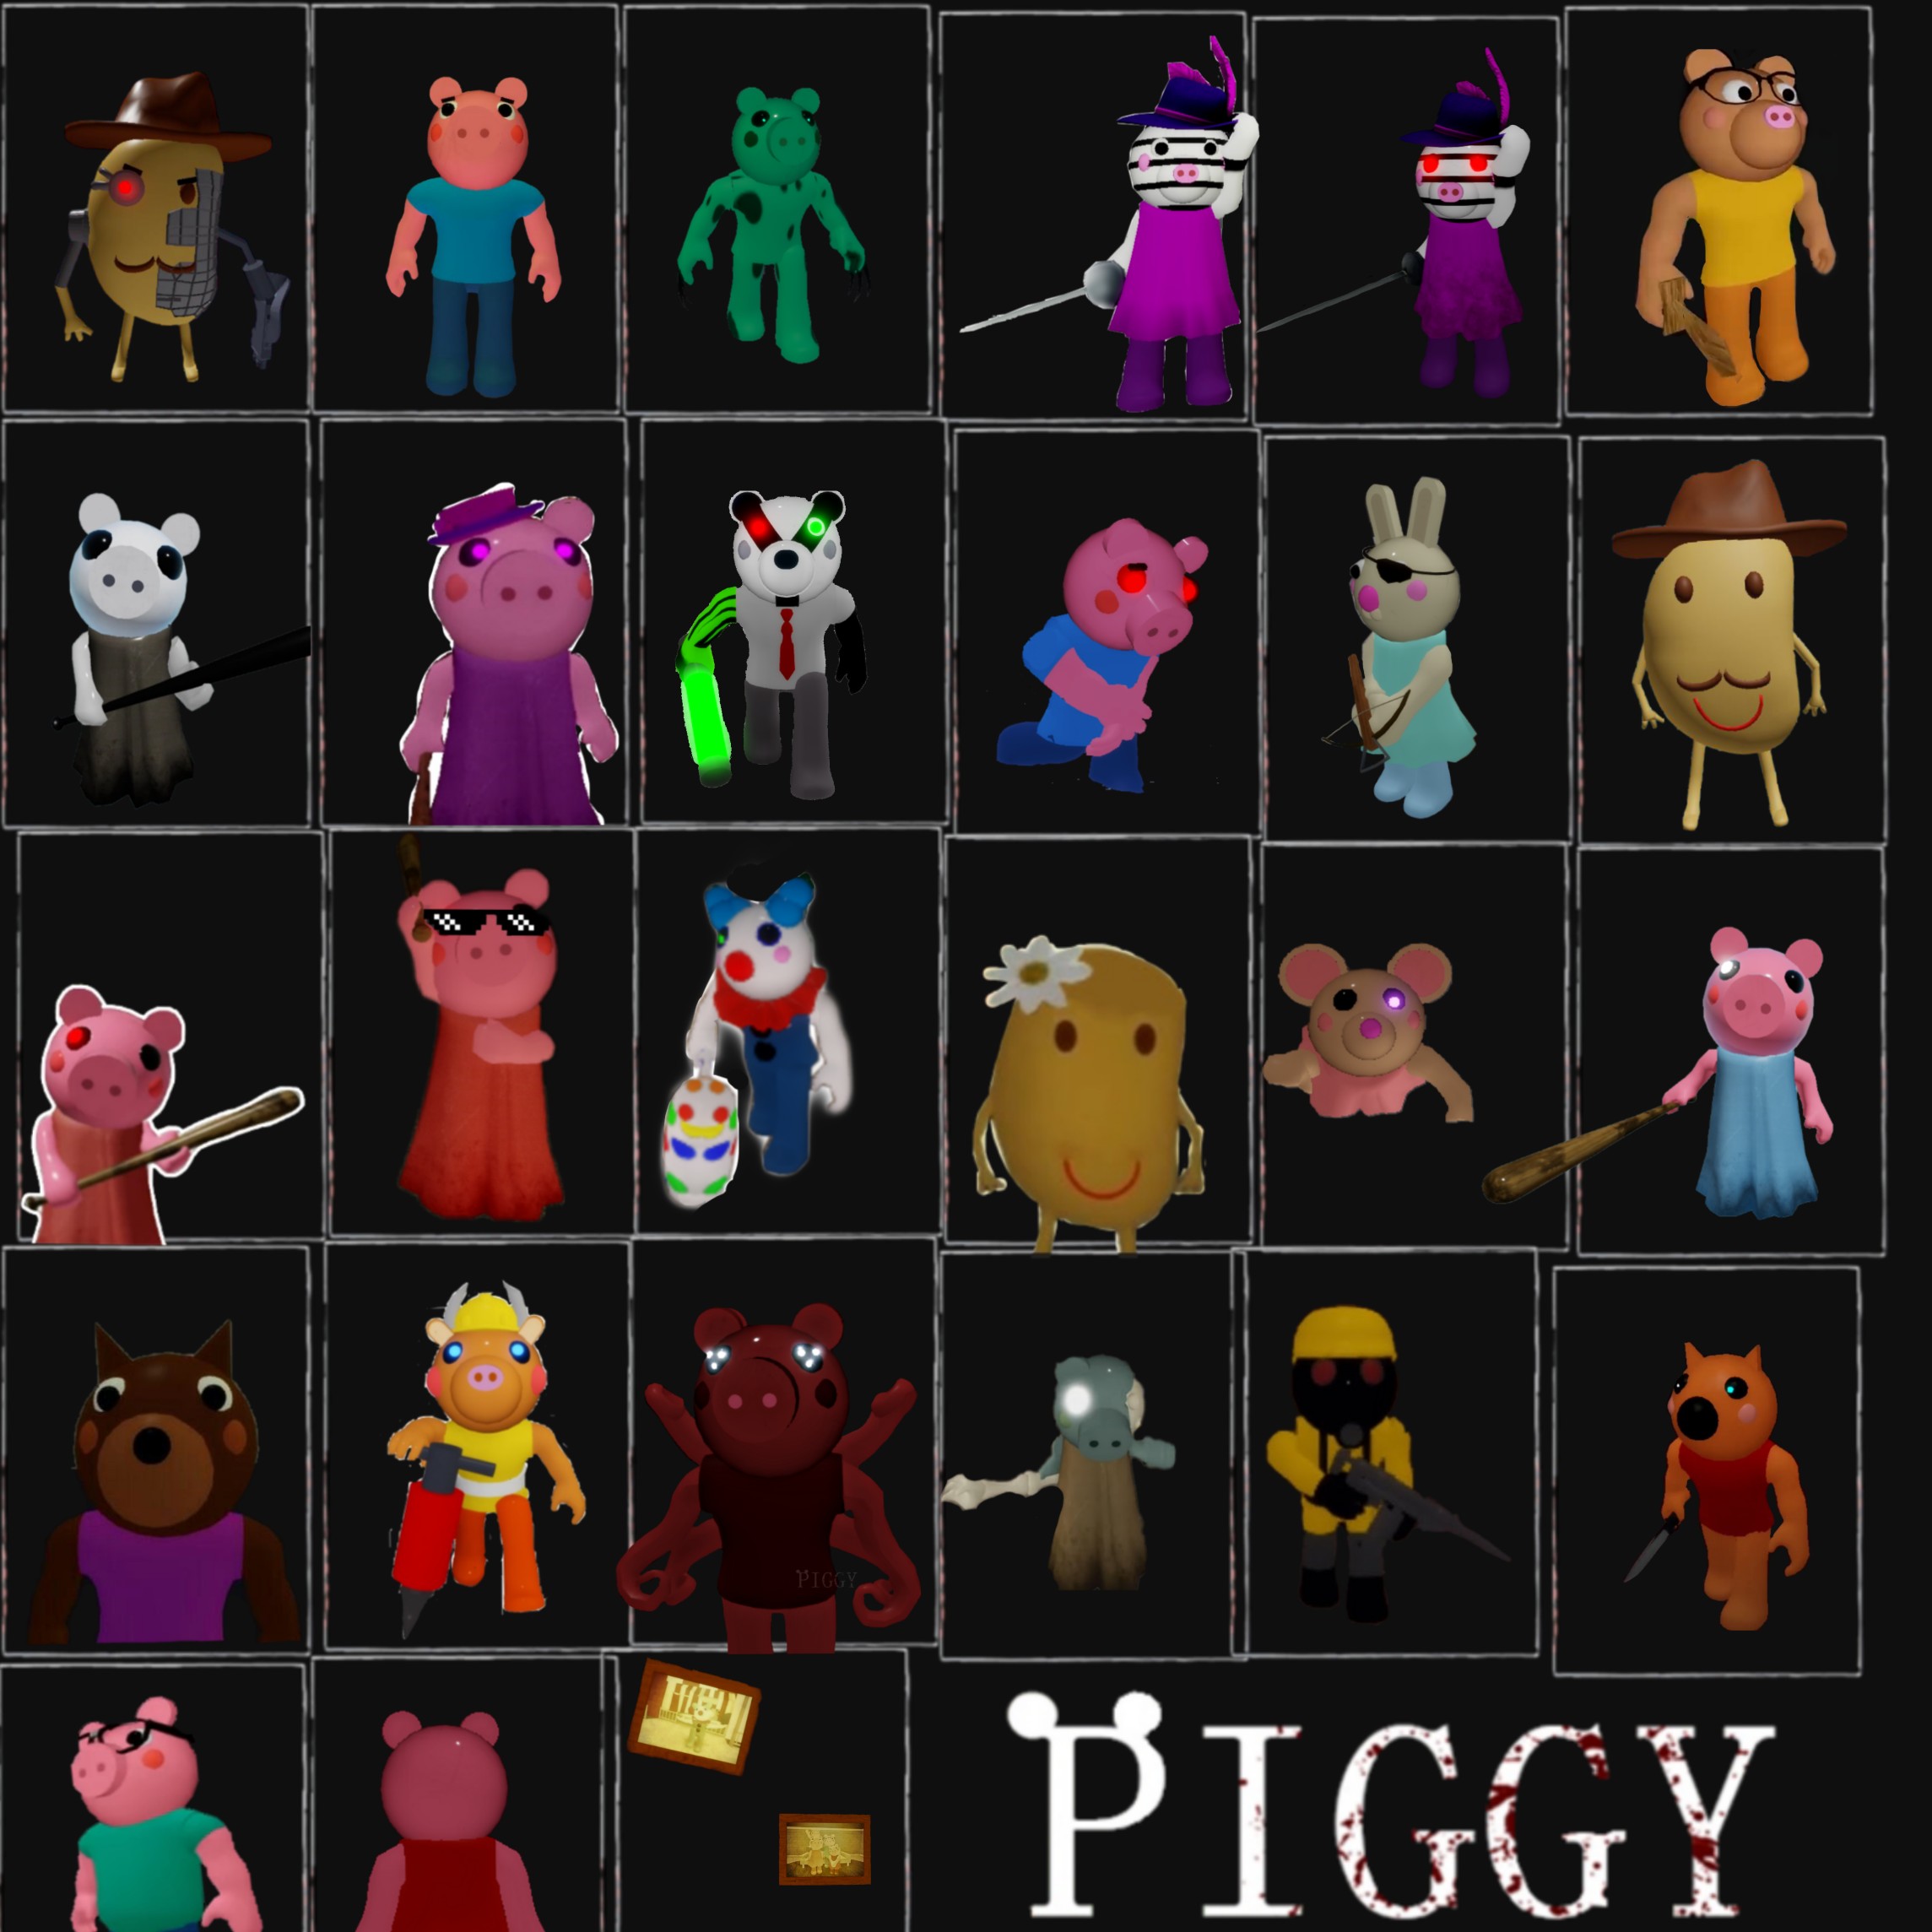 Ucn Piggy Roblox Image By Fredy - roblox action figures piggy